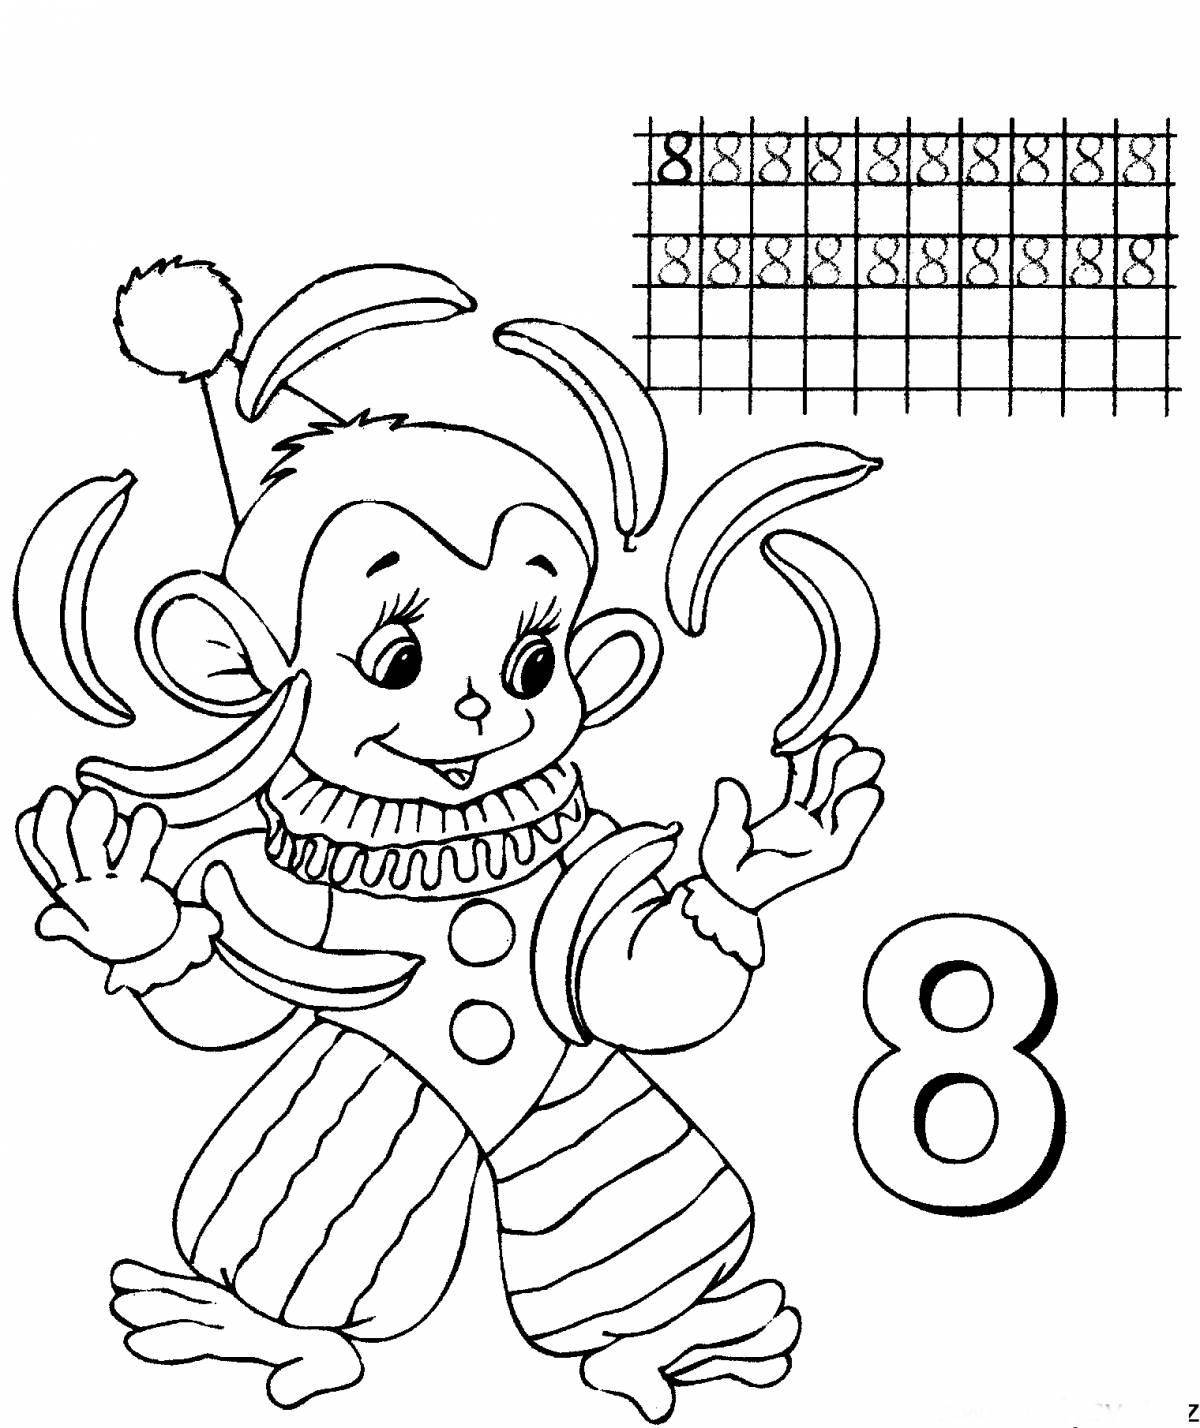 Coloring book No. 8 for children